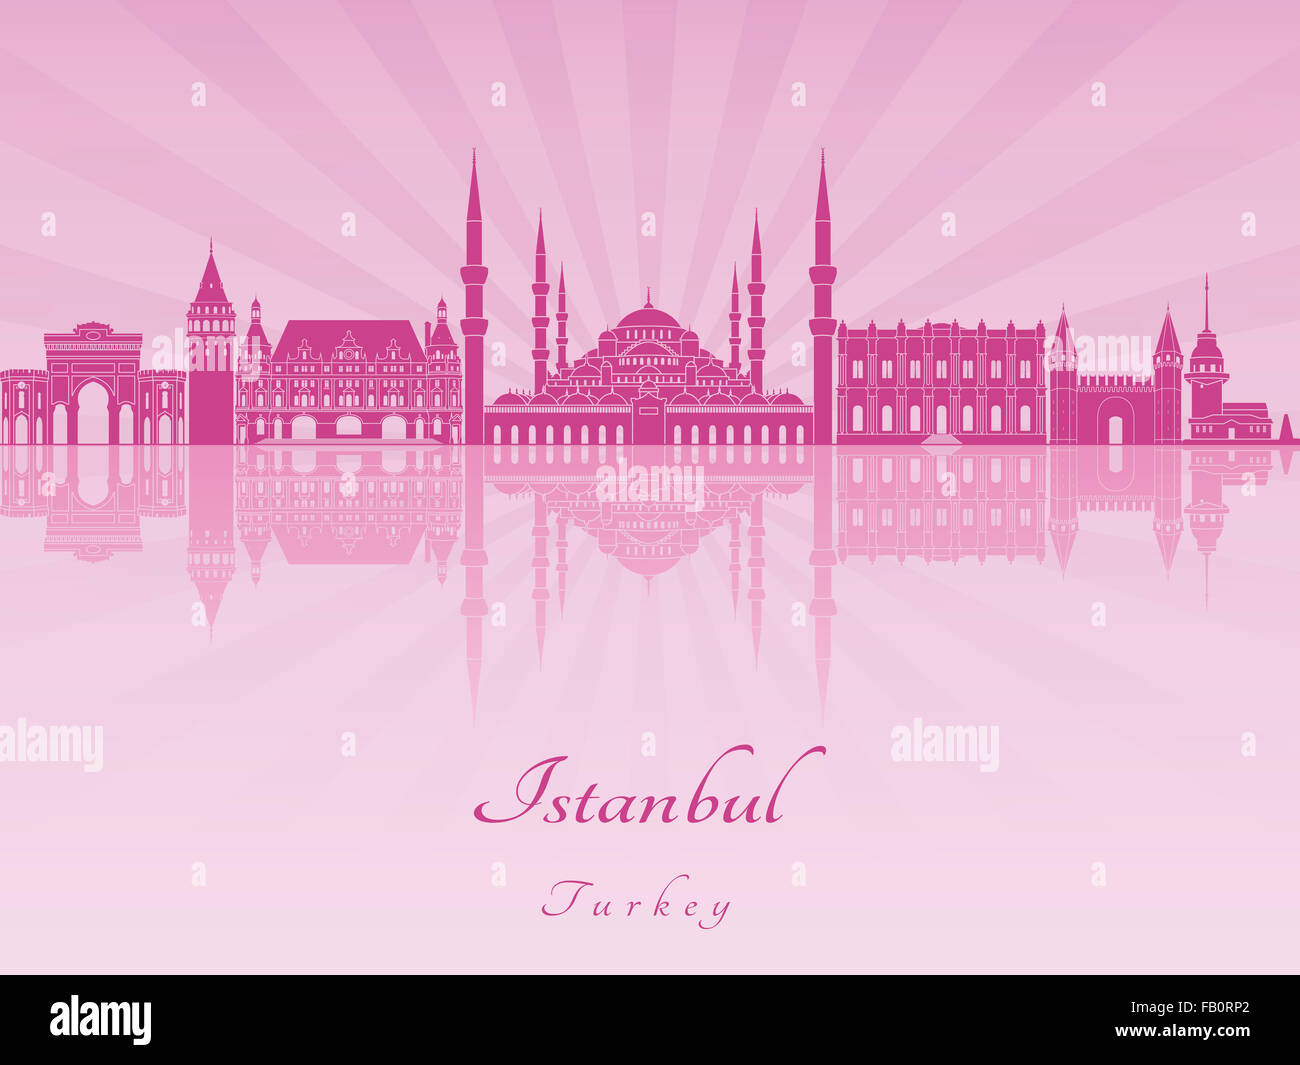 Istanbul skyline in purple radiant orchid in editable vector file Stock Photo